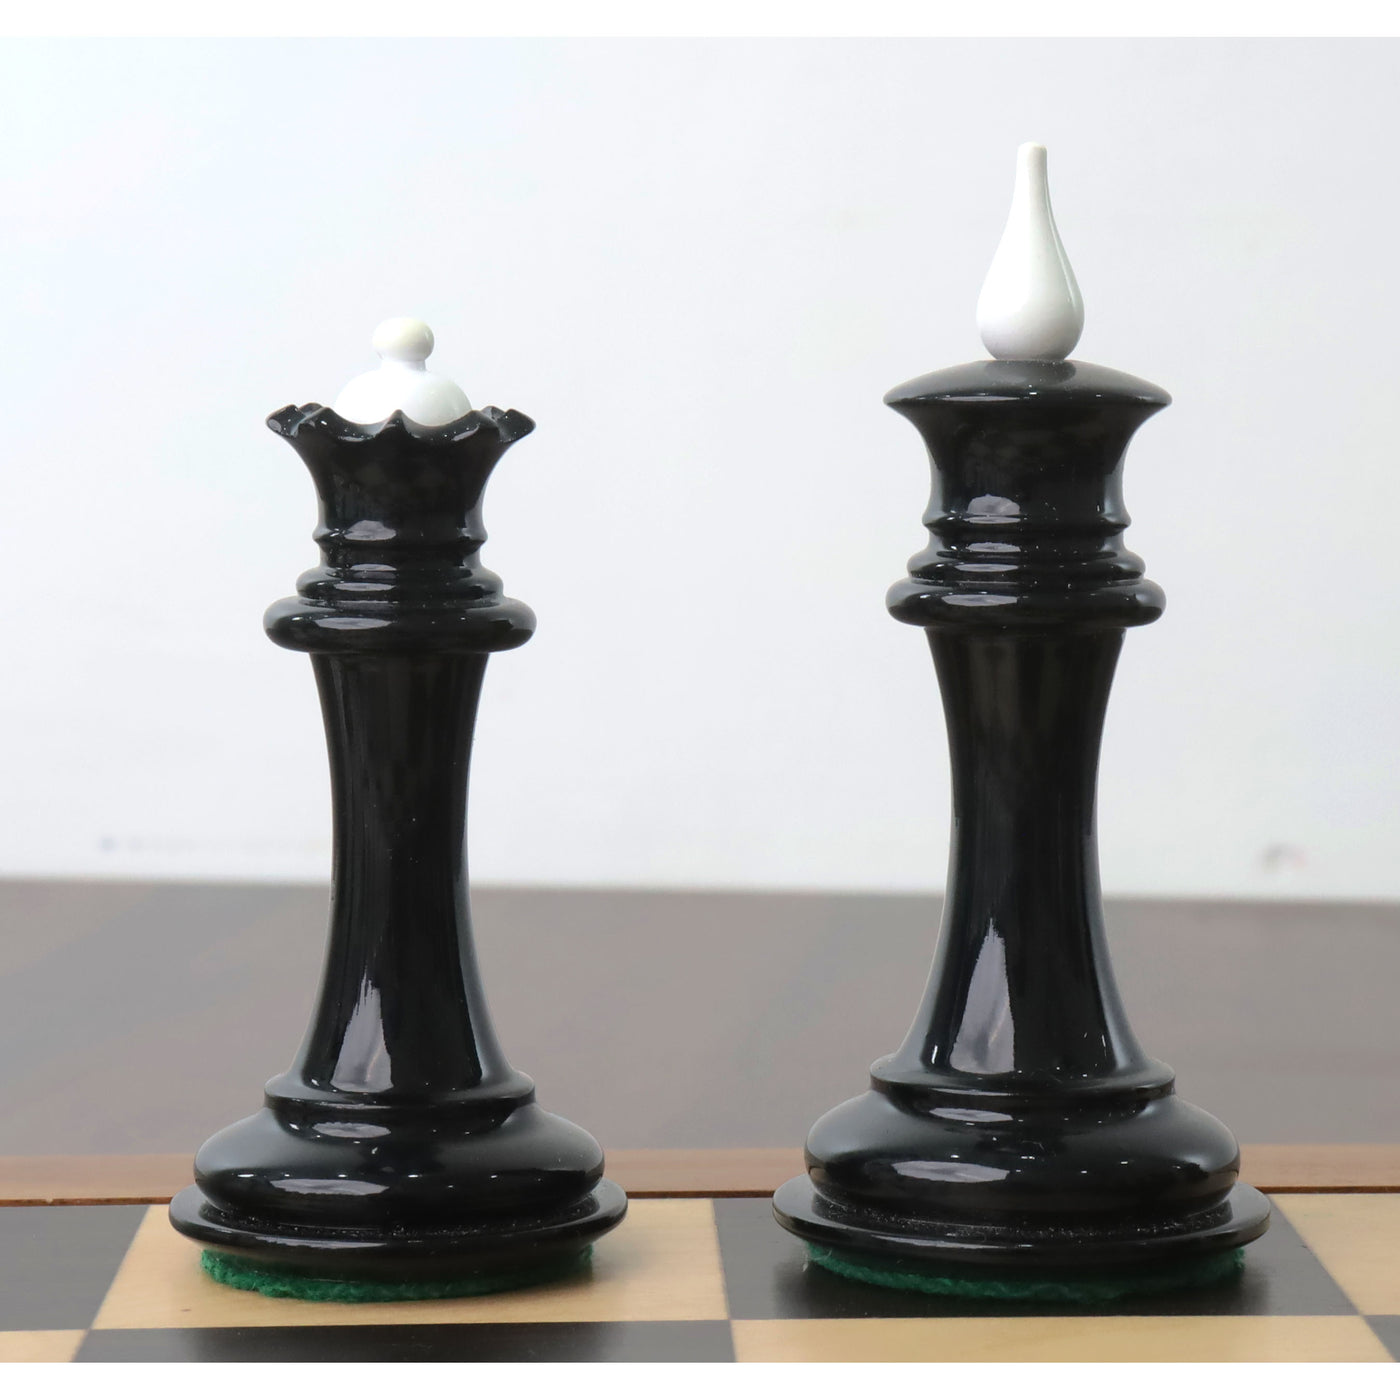 1940s' Soviet Reproduced Chess Pieces Only Set - Black and White Lacquer Boxwood